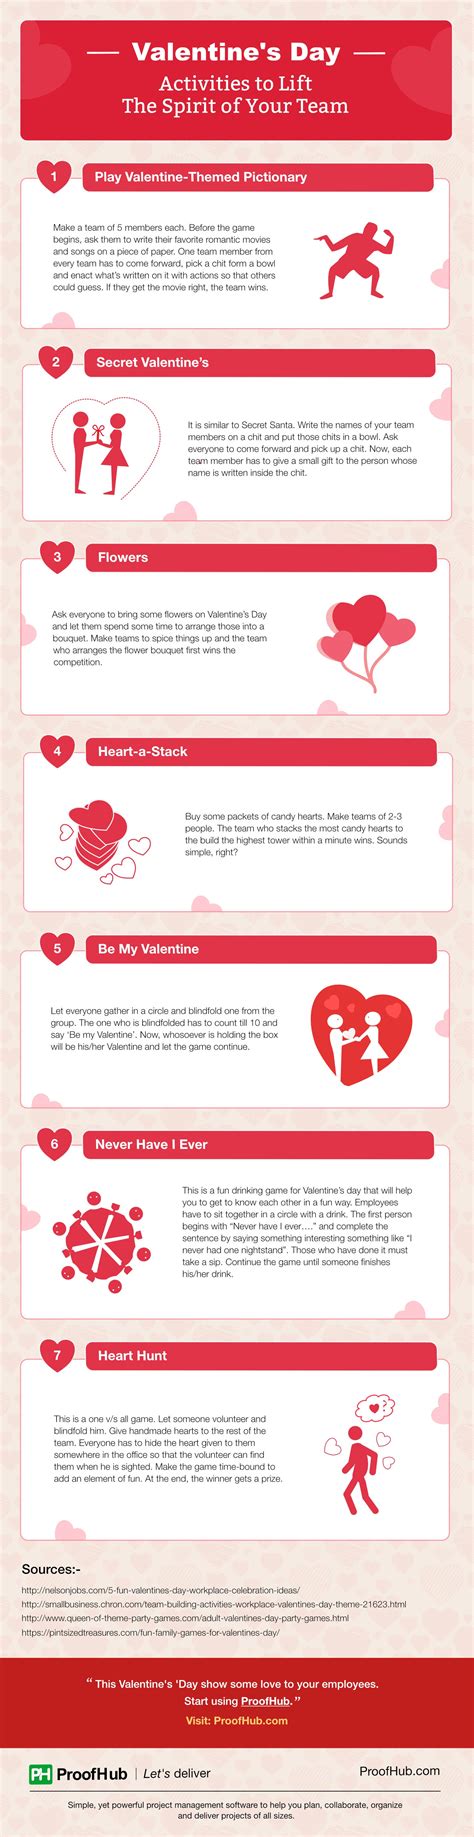 Fun Team Building Activities For Valentine’s Day By Proofhub Proofhub Blog